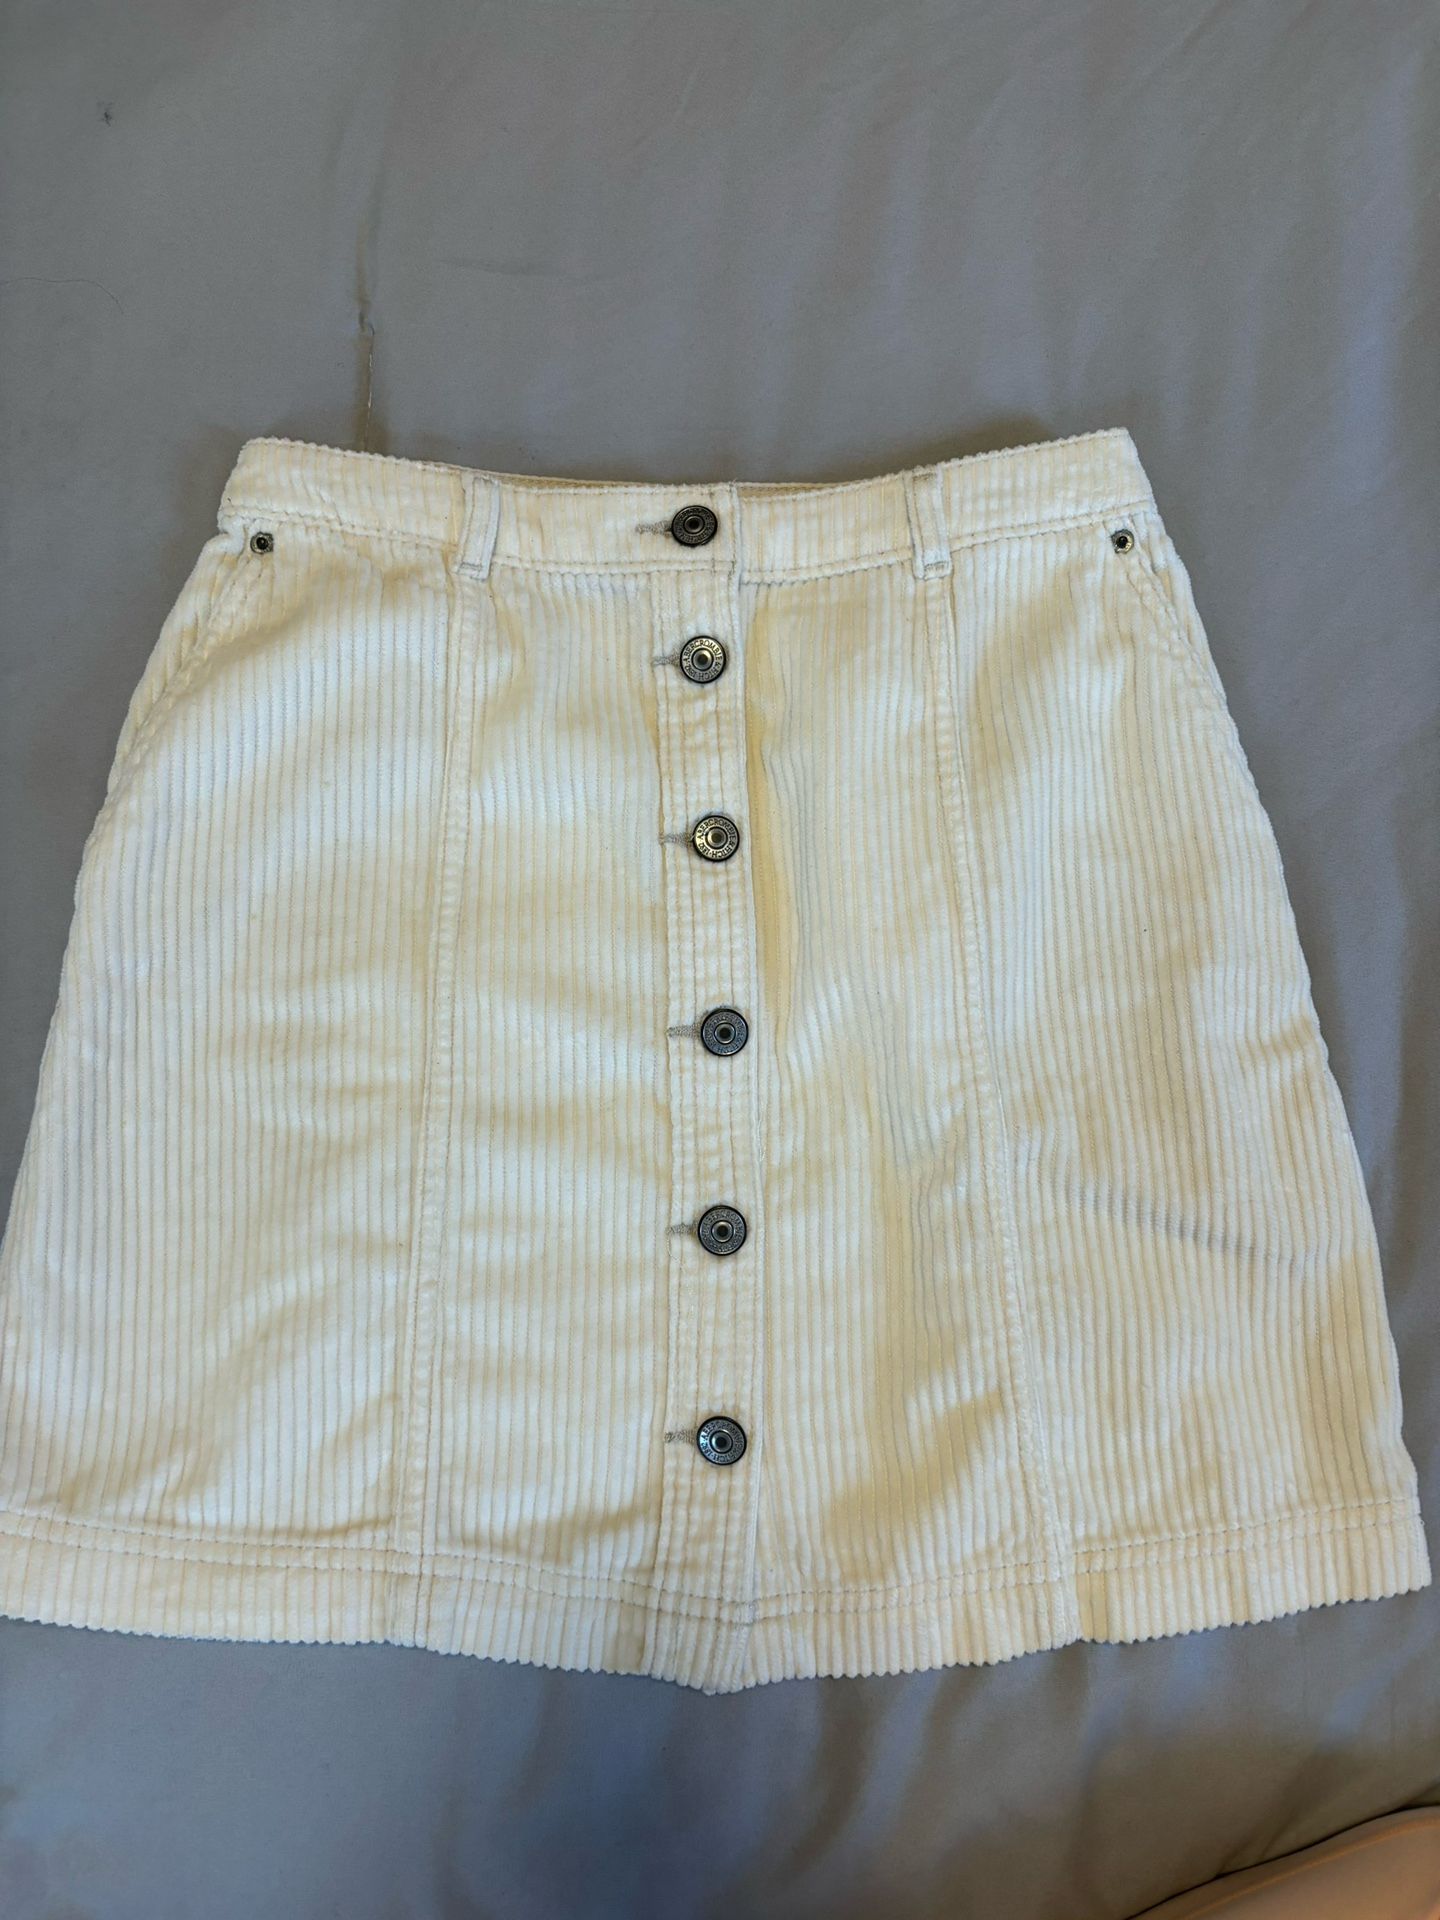 Abercrombie & Fitch Women's Cream and White Skirt